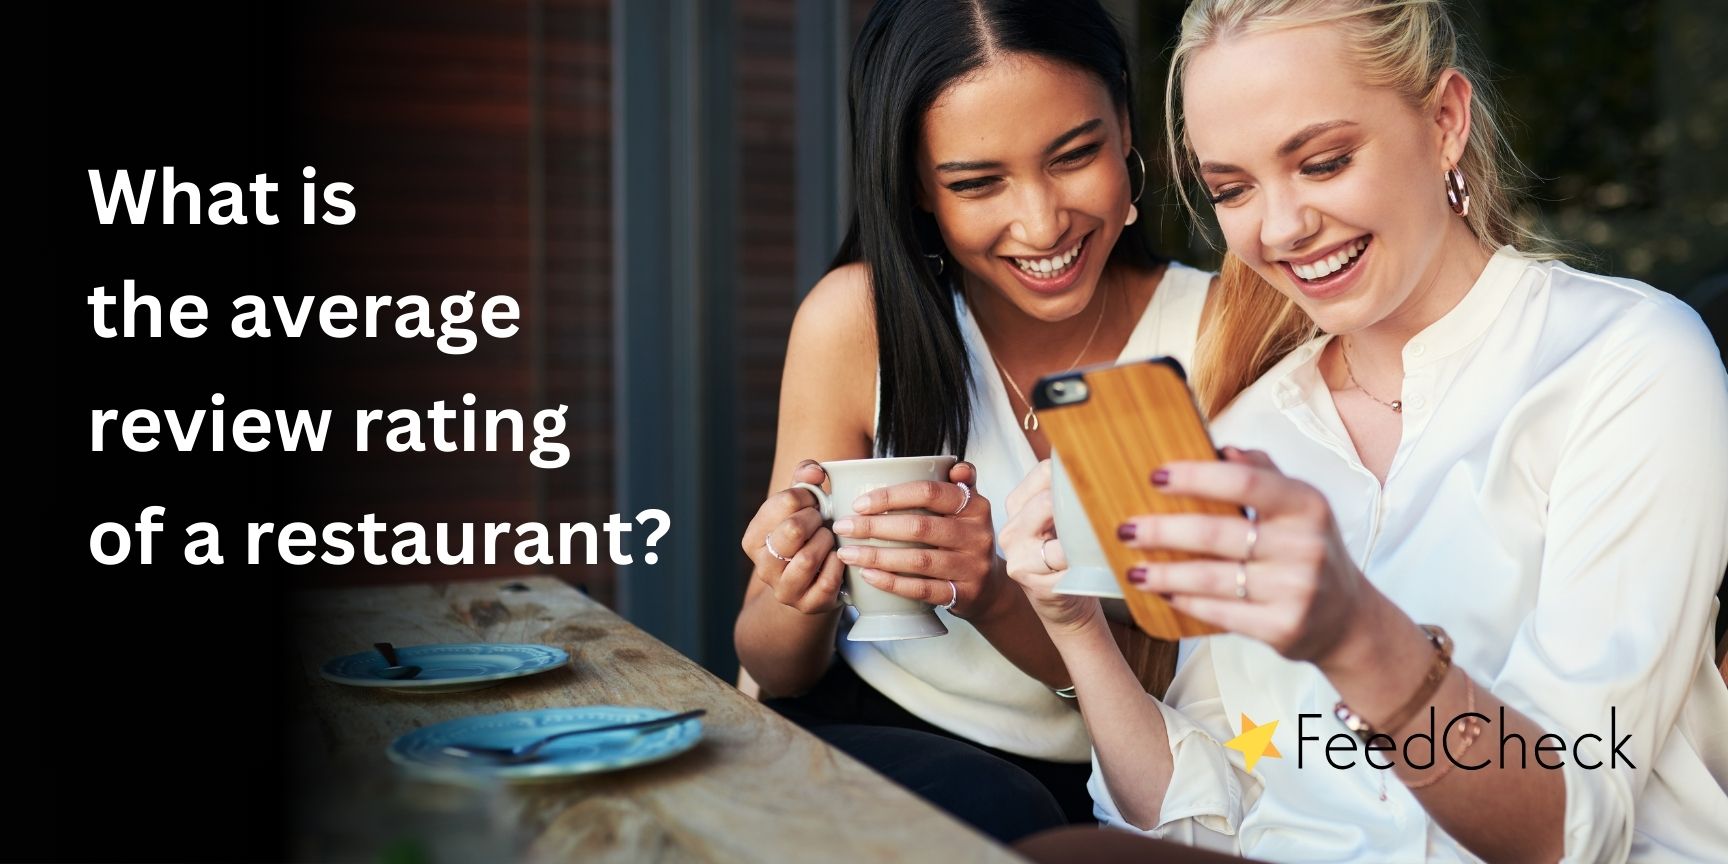 What is the average review rating of a restaurant?